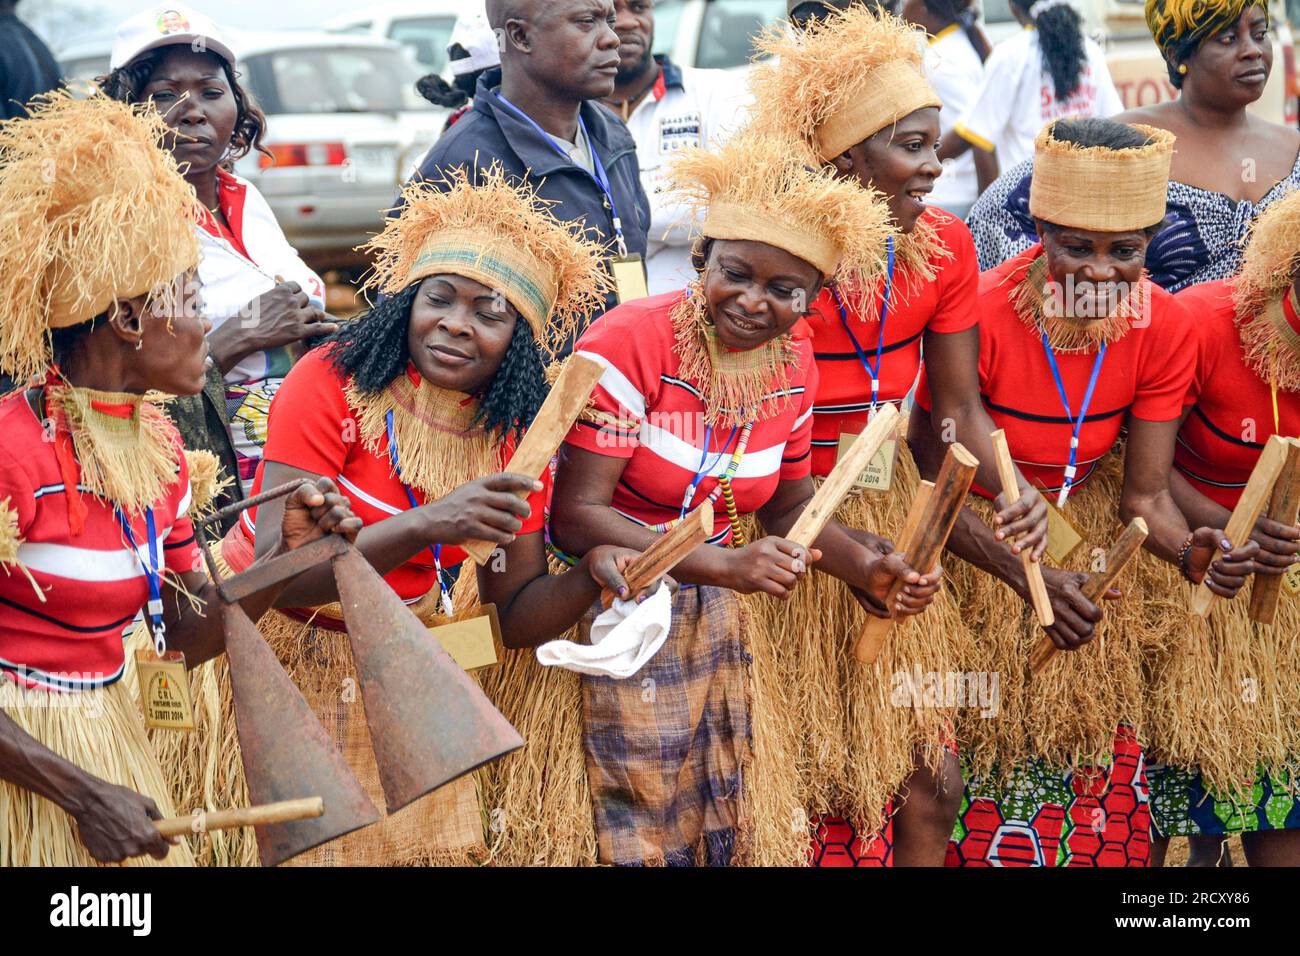 Congolese women traditional artists at an exhibition in Sibiti (located between Brazzaville and Pointe-Noire), during an official ceremony, August 13, 2014 Stock Photo